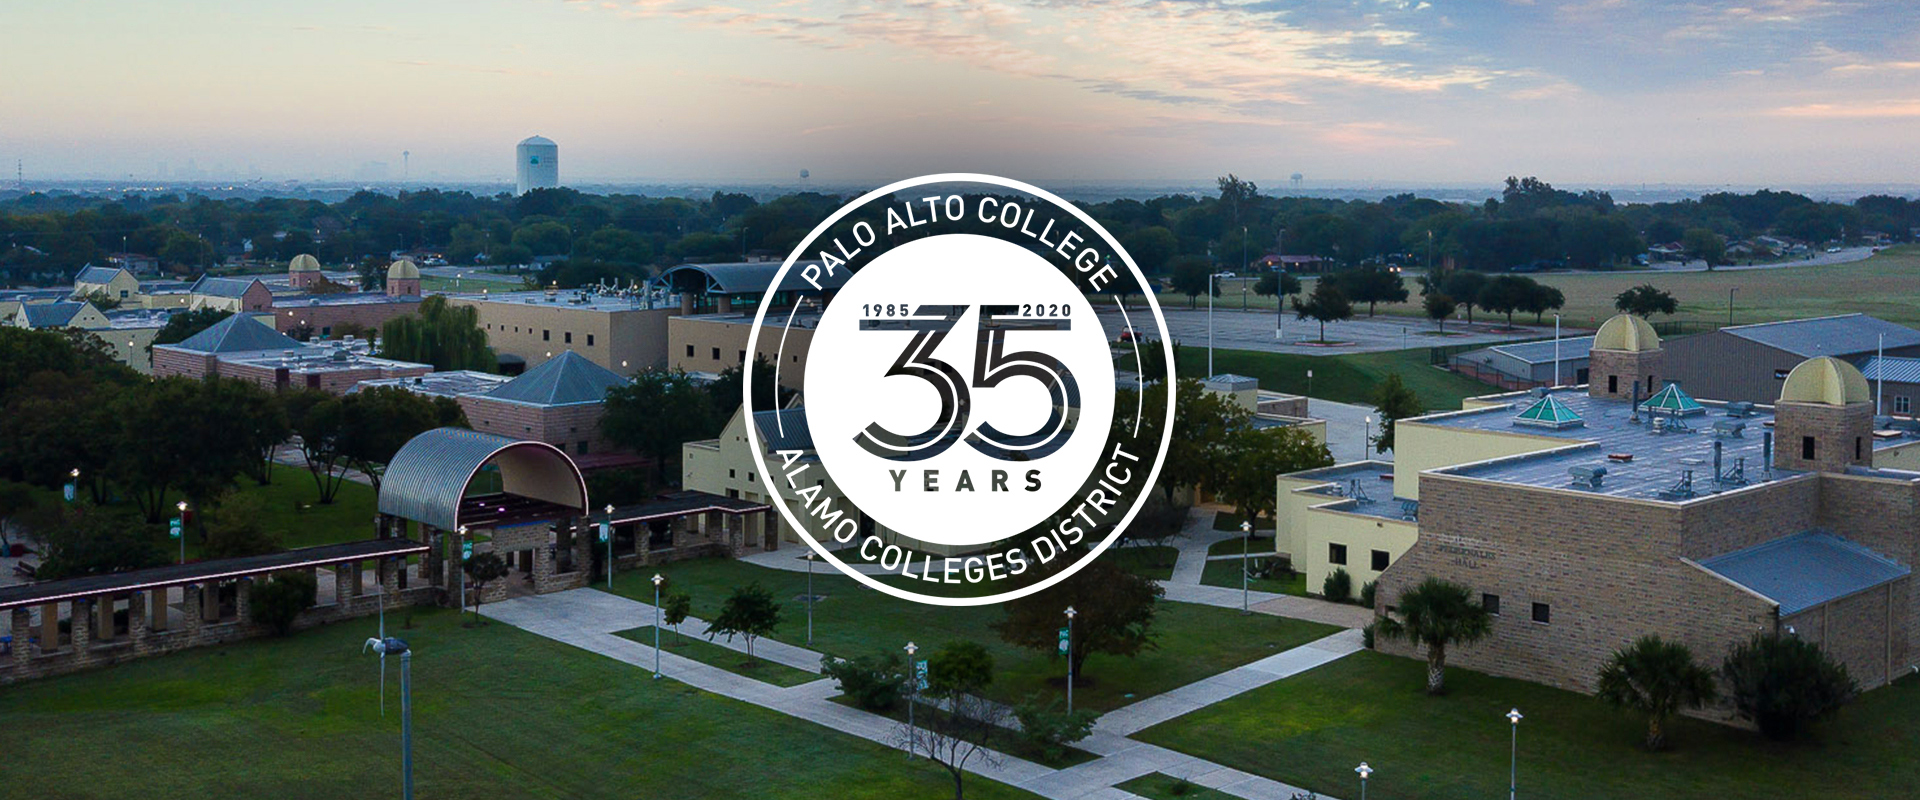 PAC : 35th Anniversary | Alamo Colleges